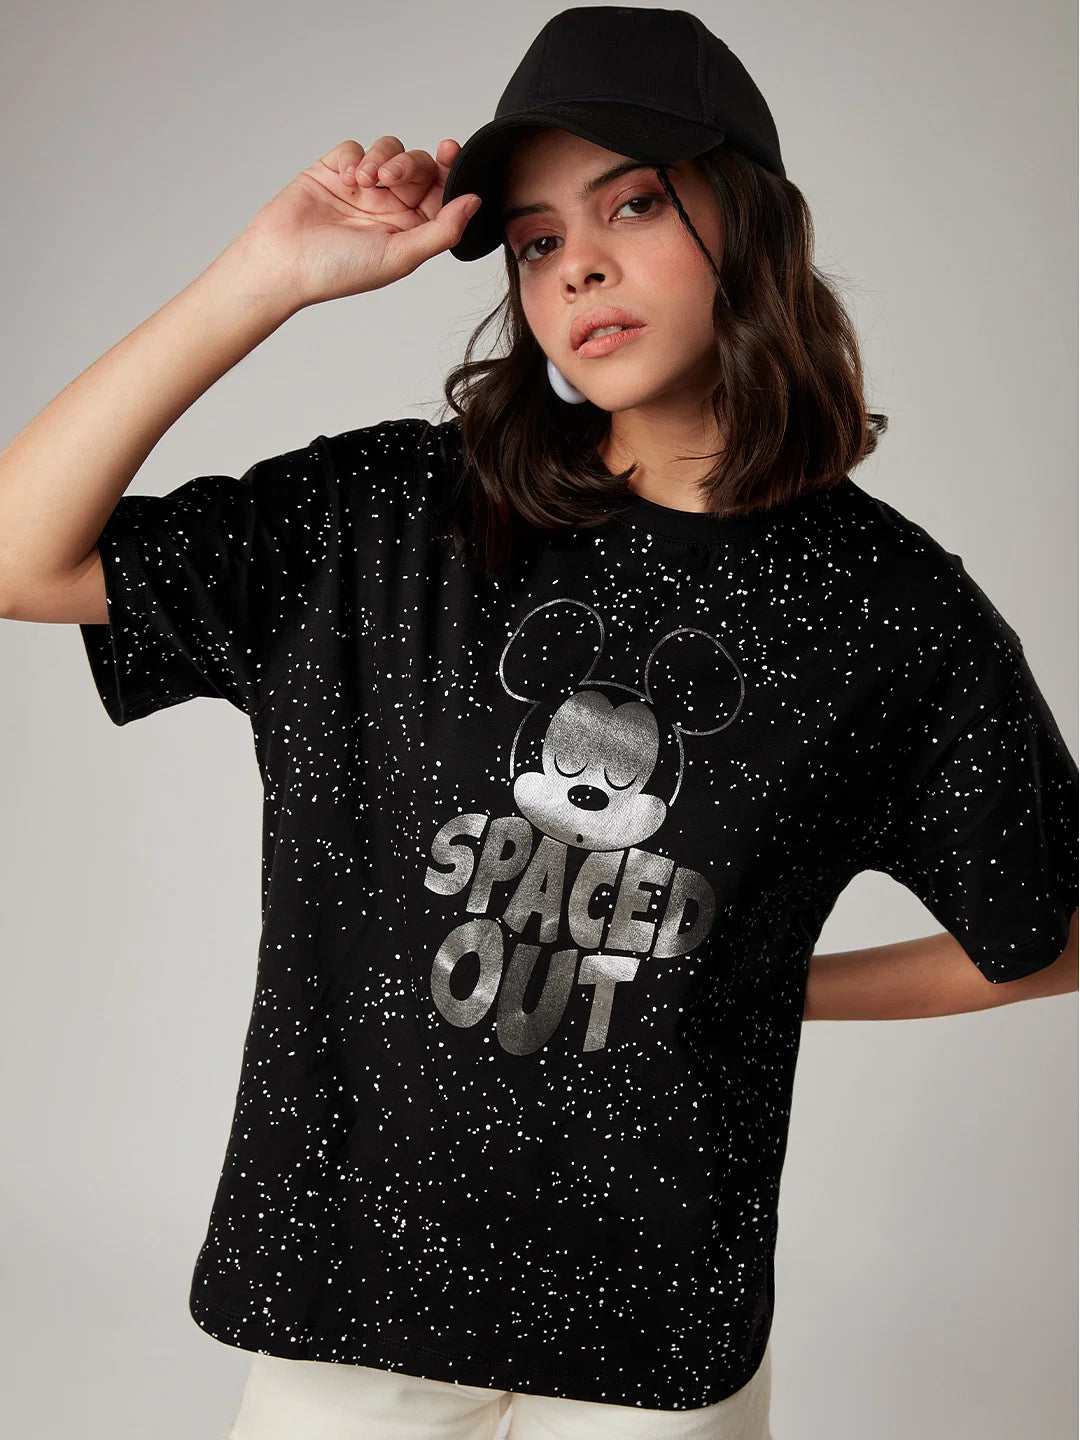 Disney Spaced Out (UK version)